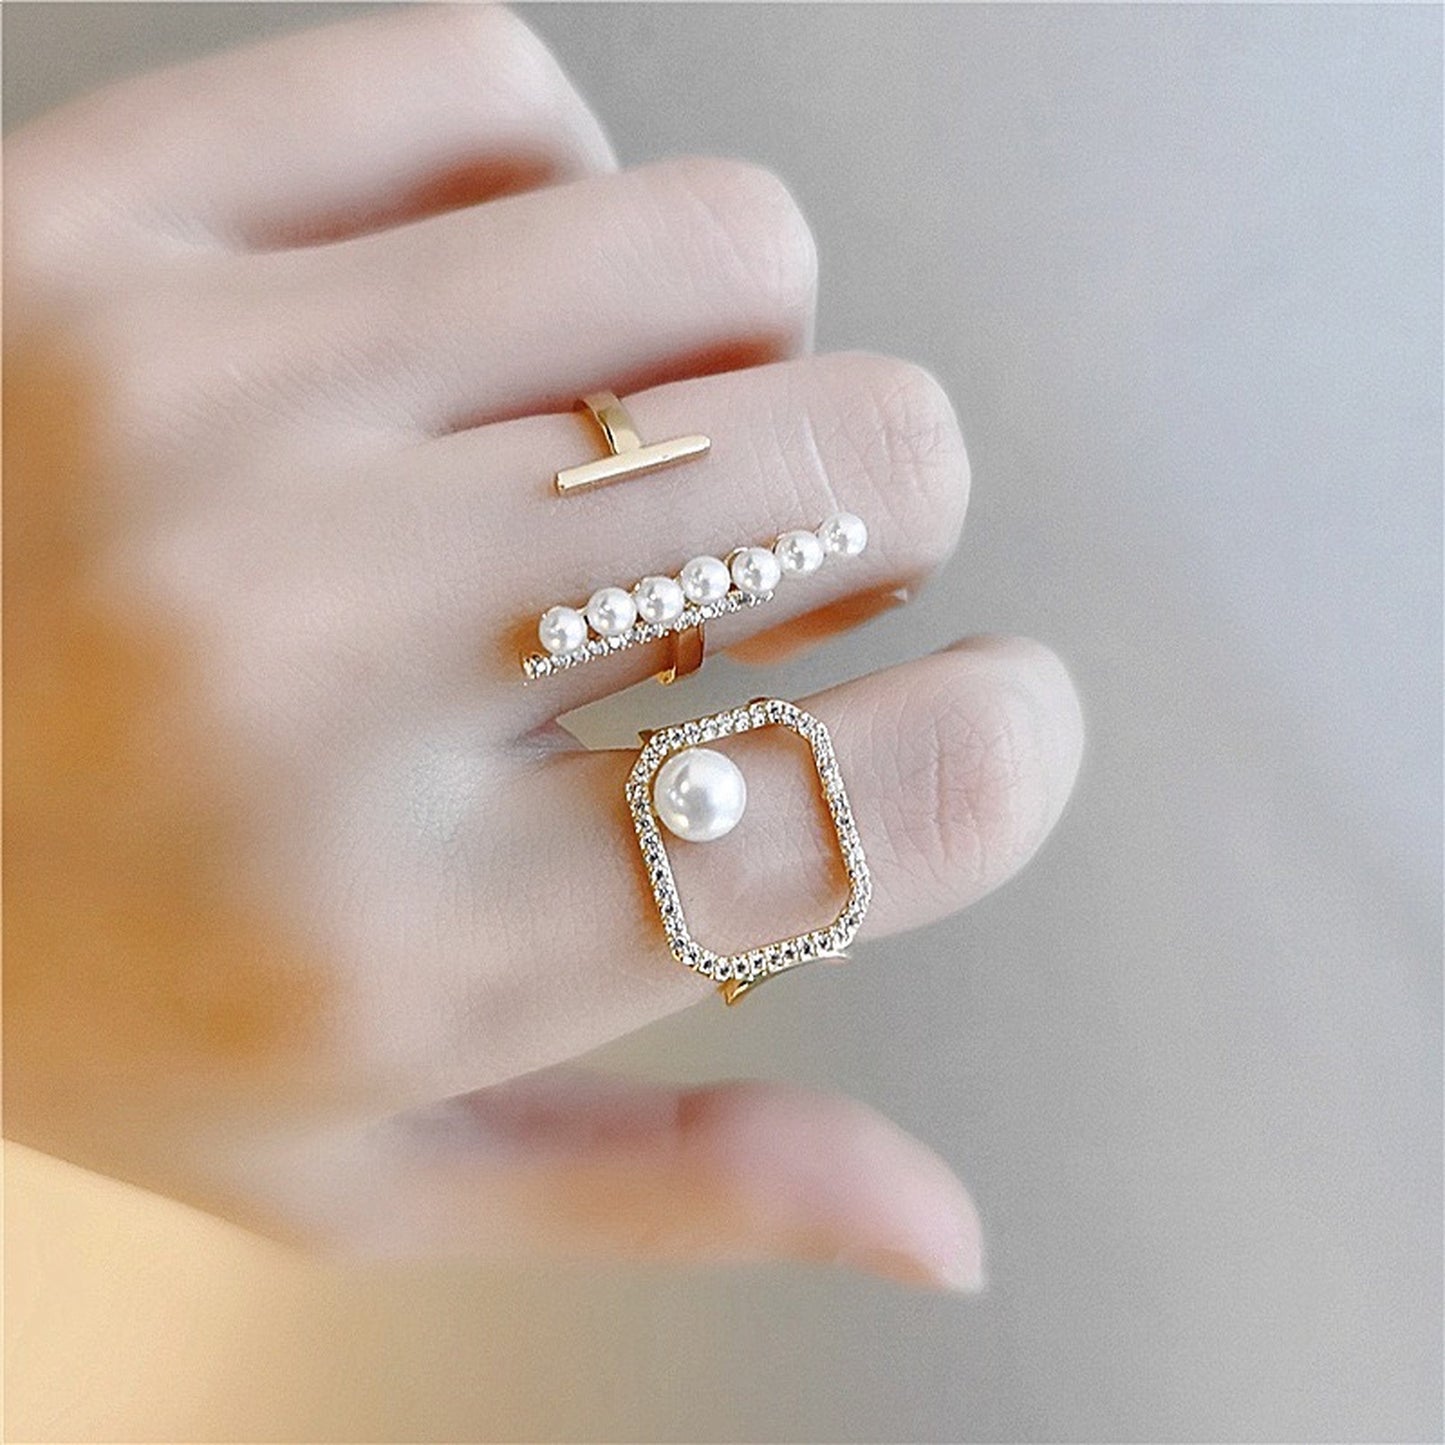 Geometrical Rings, Hallowed-out Rings, Large Chunky Rings, Gold and Pearl Cocktail Ring, Avant Garde Minimalism, K-POP Stacking Rings, Gift